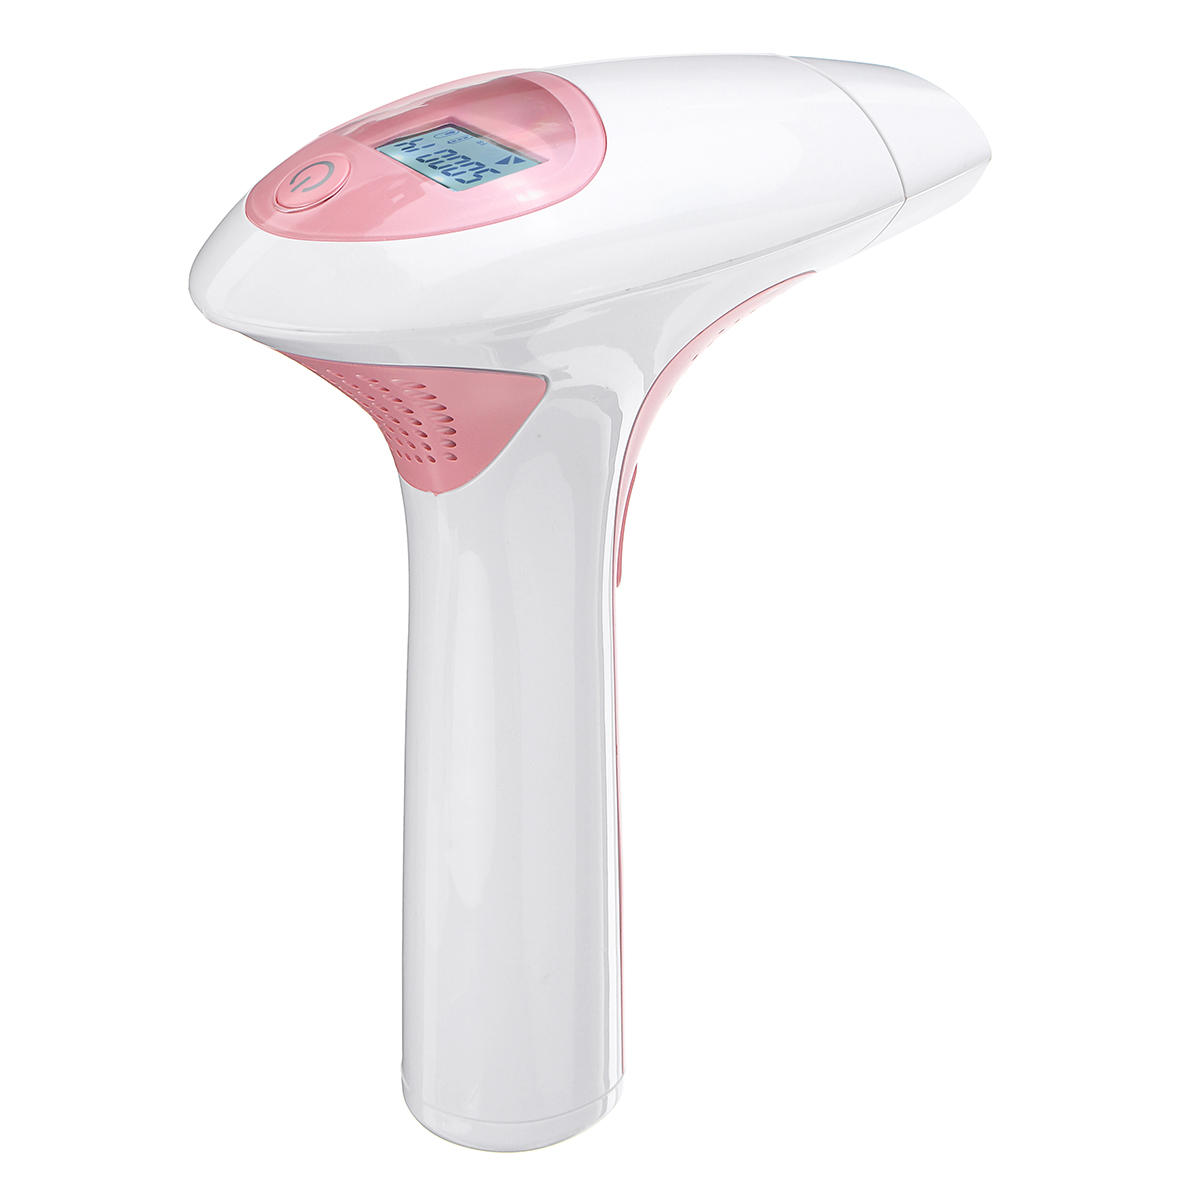 

500000 Flashes Laser IPL Permanent Hair Removal Machine 5 Speed Painless Epilator Body Hair Remove Device Set With Sungl